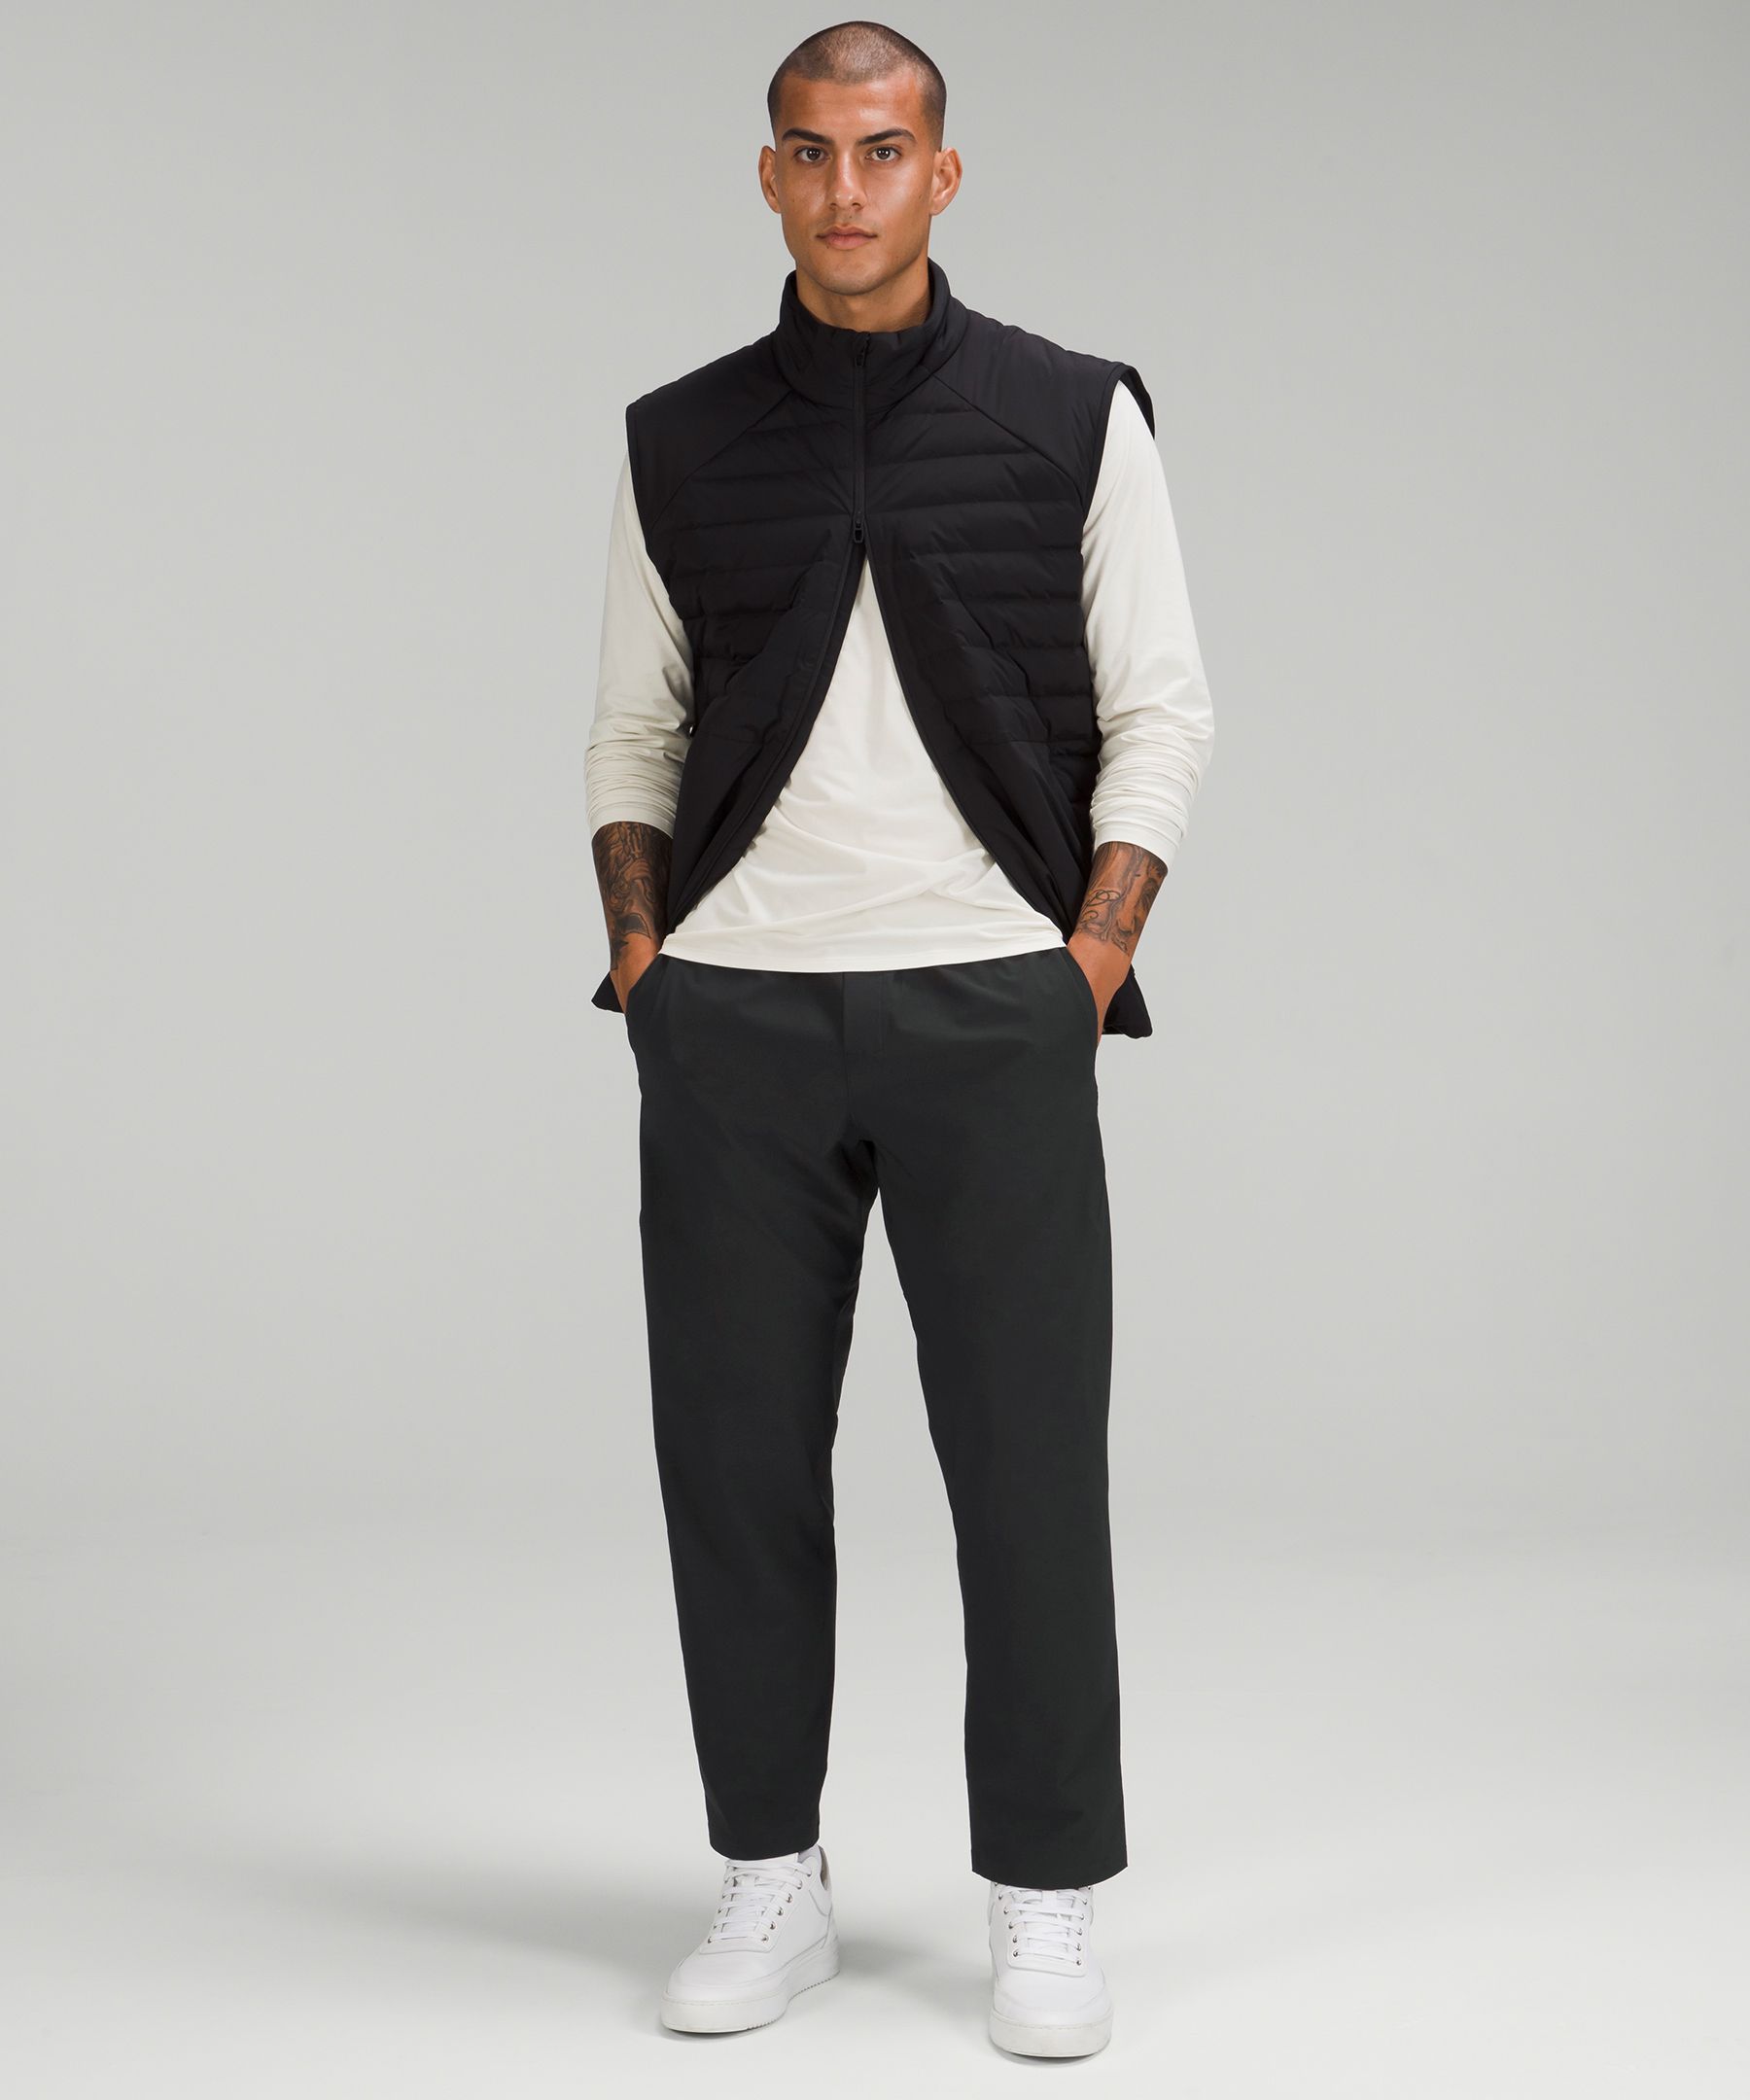 Relaxed Fit Pant | Men's What's New | Lululemon HK